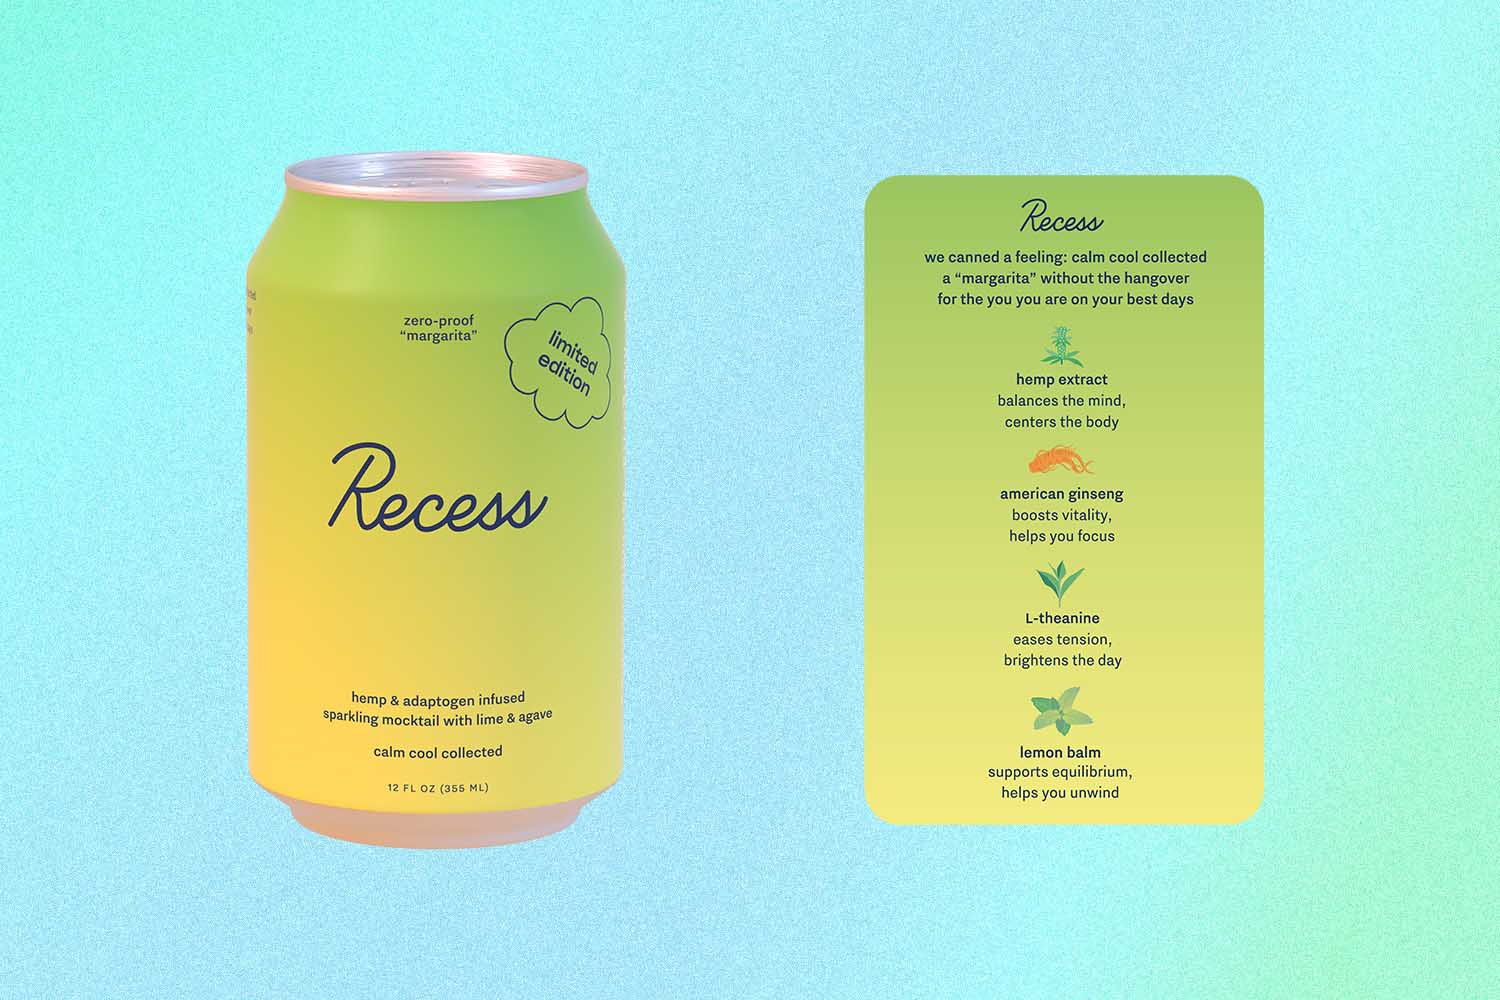 A can of Recess Zero-Proof Margarita and its purported health benefits